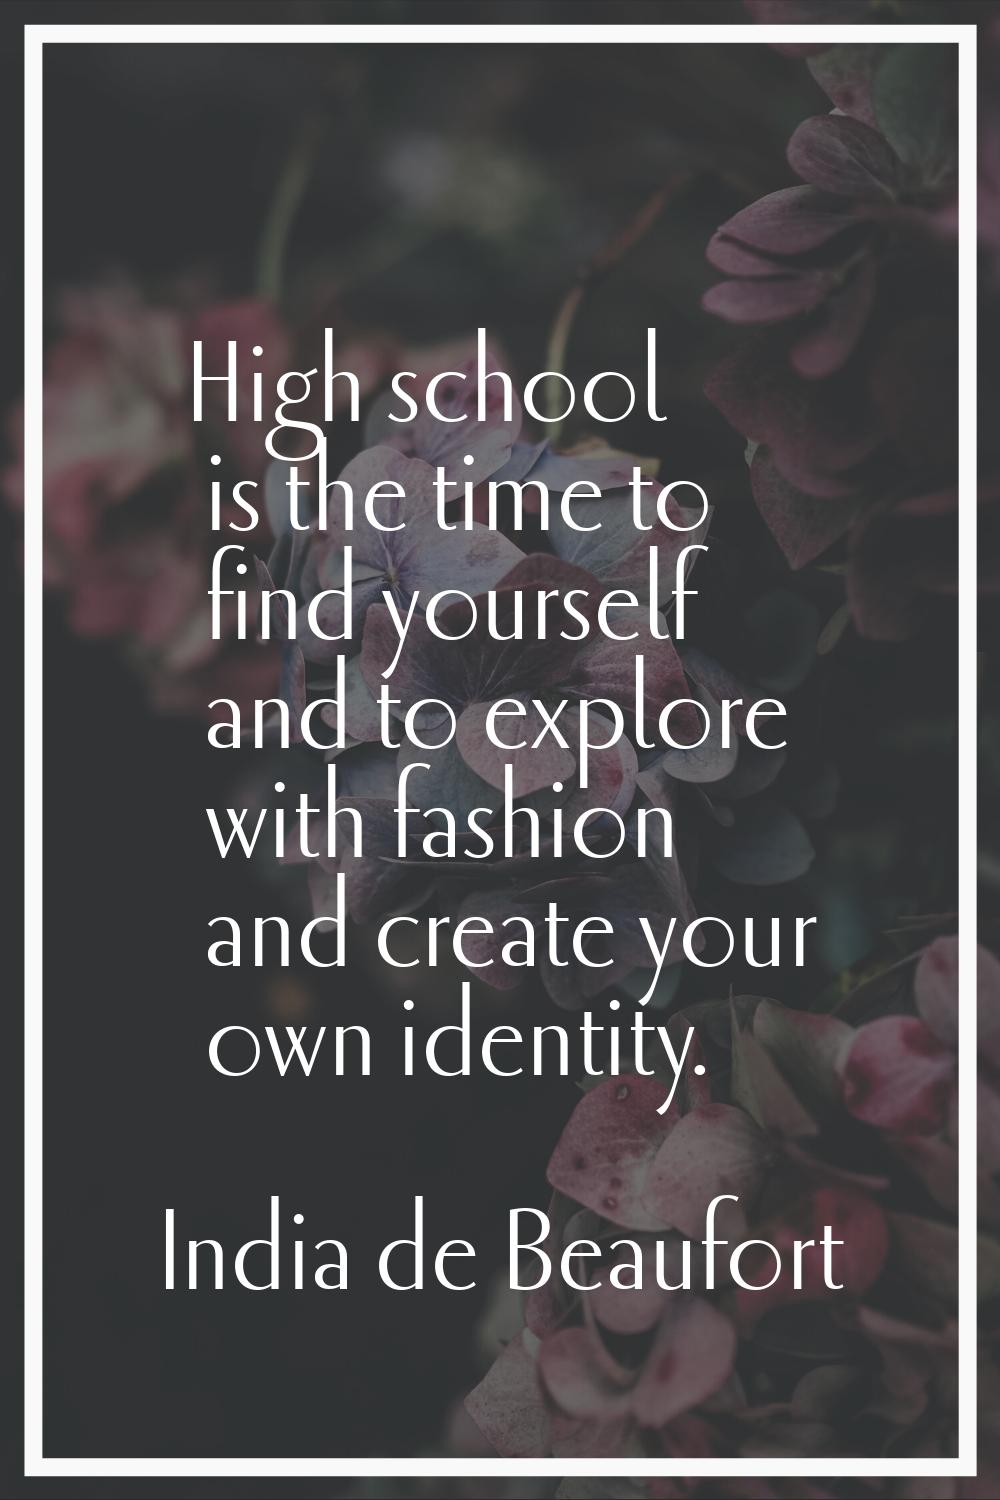 High school is the time to find yourself and to explore with fashion and create your own identity.